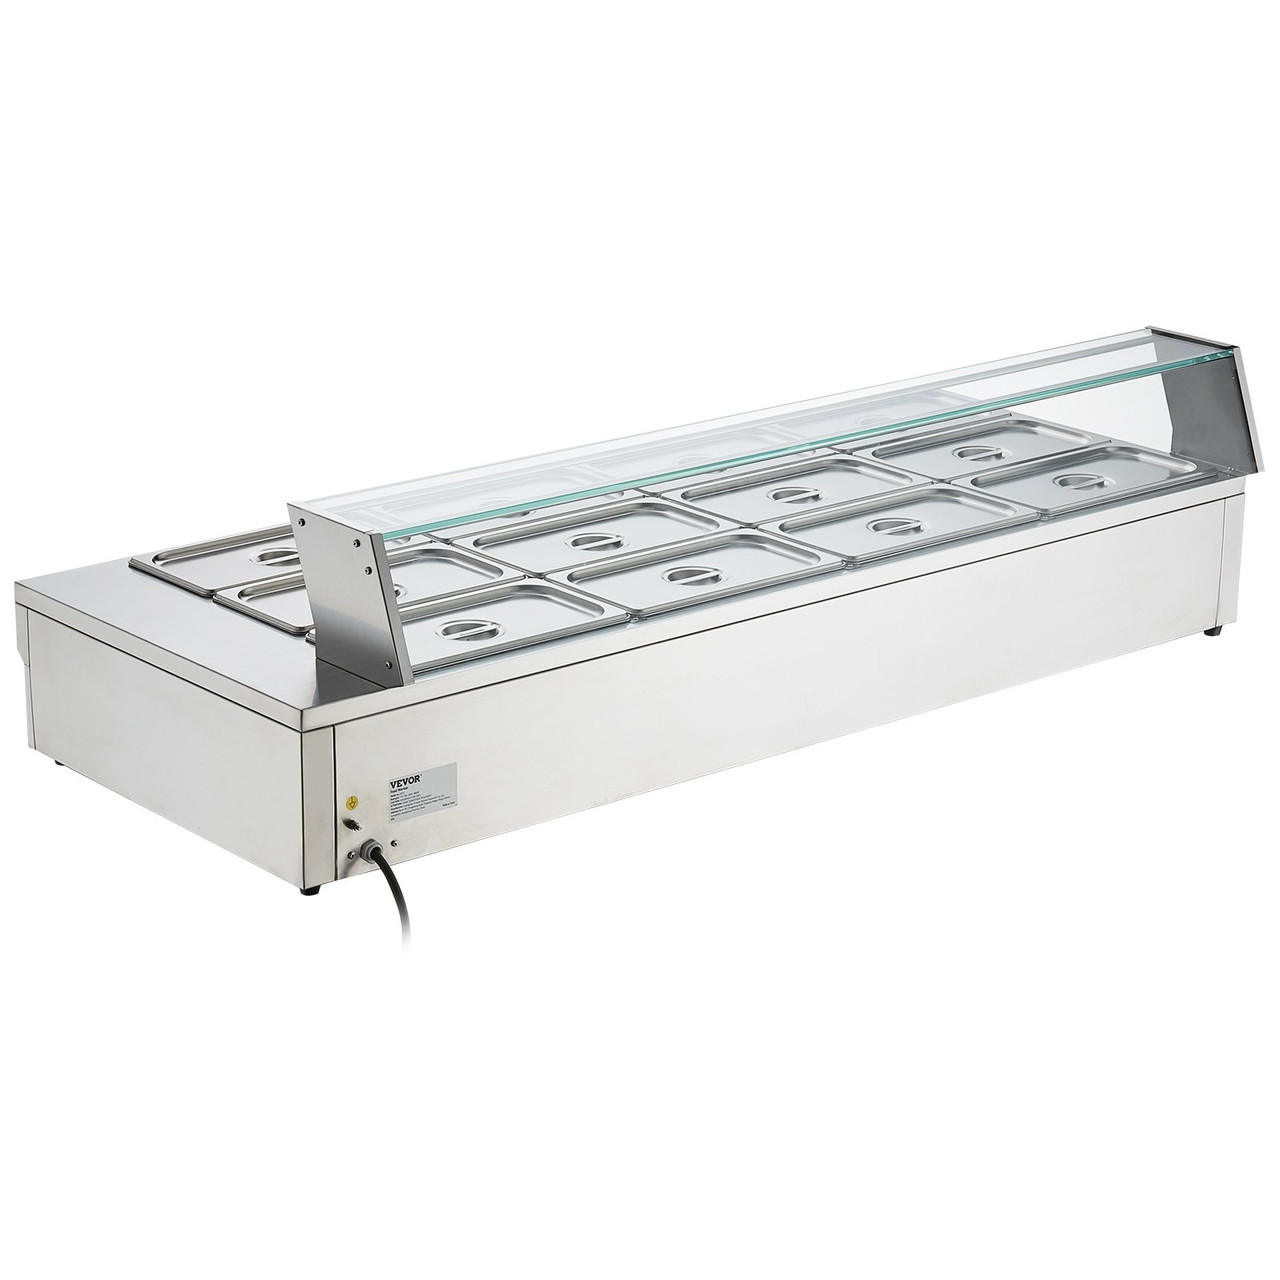 12-Pan Commercial Food Warmer, 12 x 8QT Electric Steam Table with Tempered Glass Cover, 1800W Countertop Stainless Steel Buffet Bain Marie 86-185°F Temp Control for Catering, Restaurant, Silver